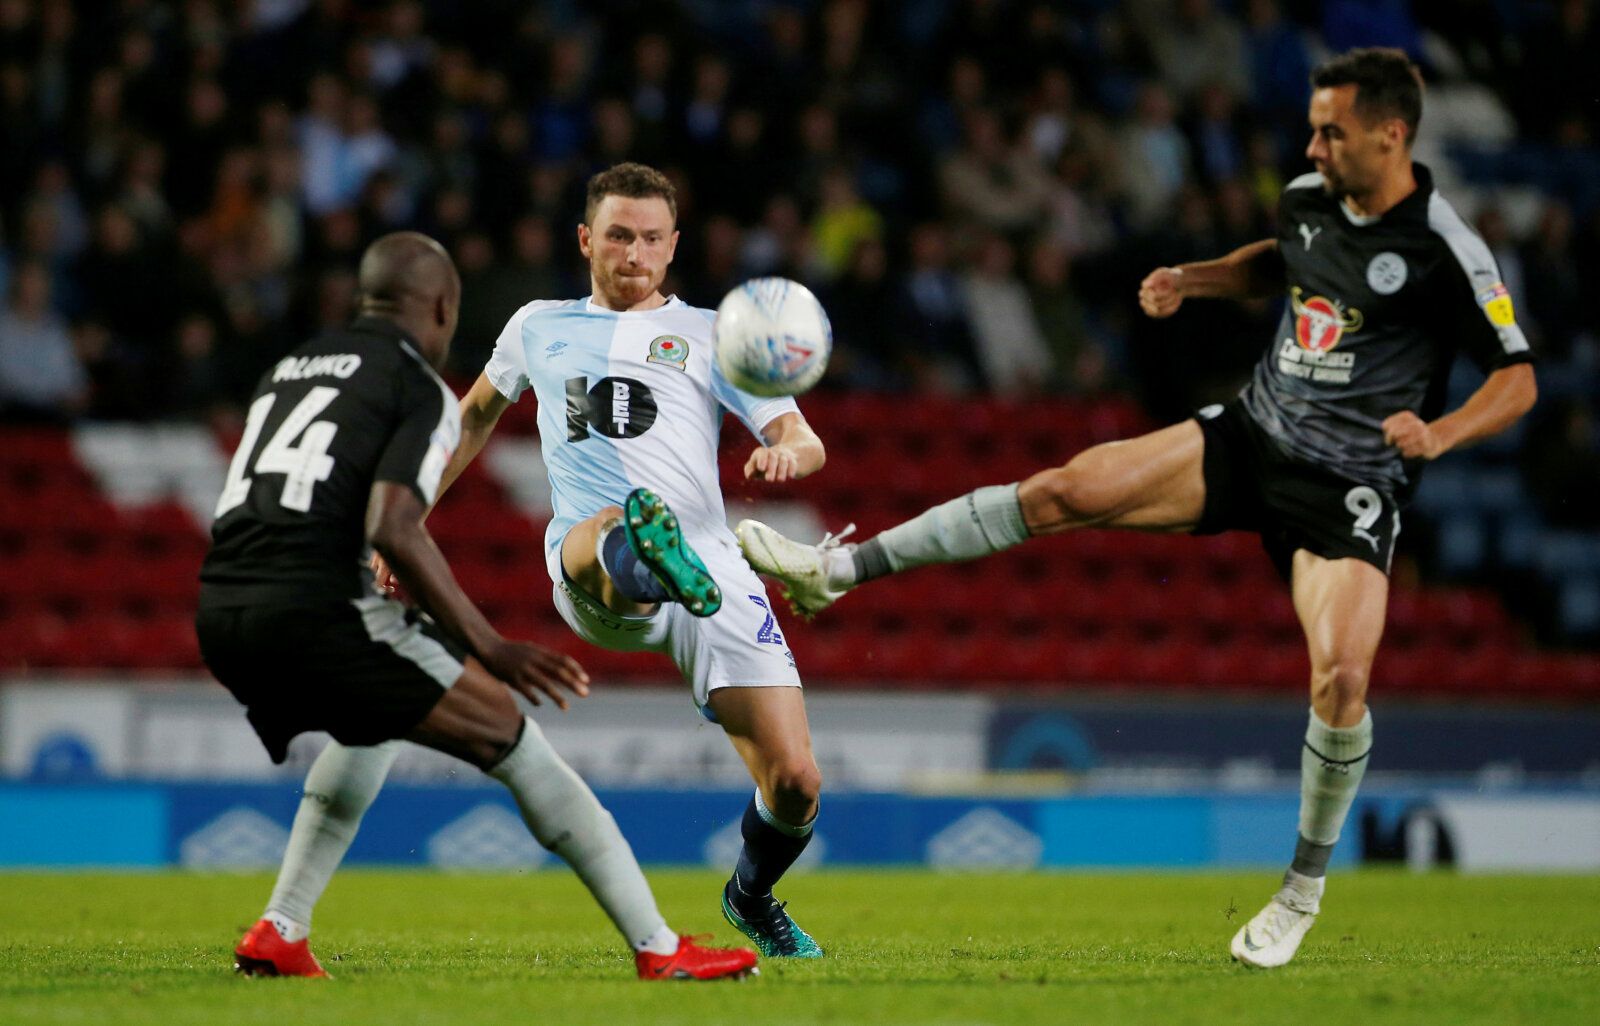 Soccer Football - Championship - Blackburn Rovers v Reading - Ewood Park, Blackburn, Britain - August 22, 2018   Blackburn Rovers' Corry Evans in action with Reading's Sone Aluko and Sam Baldock   Action Images/Craig Brough    EDITORIAL USE ONLY. No use with unauthorized audio, video, data, fixture lists, club/league logos or 